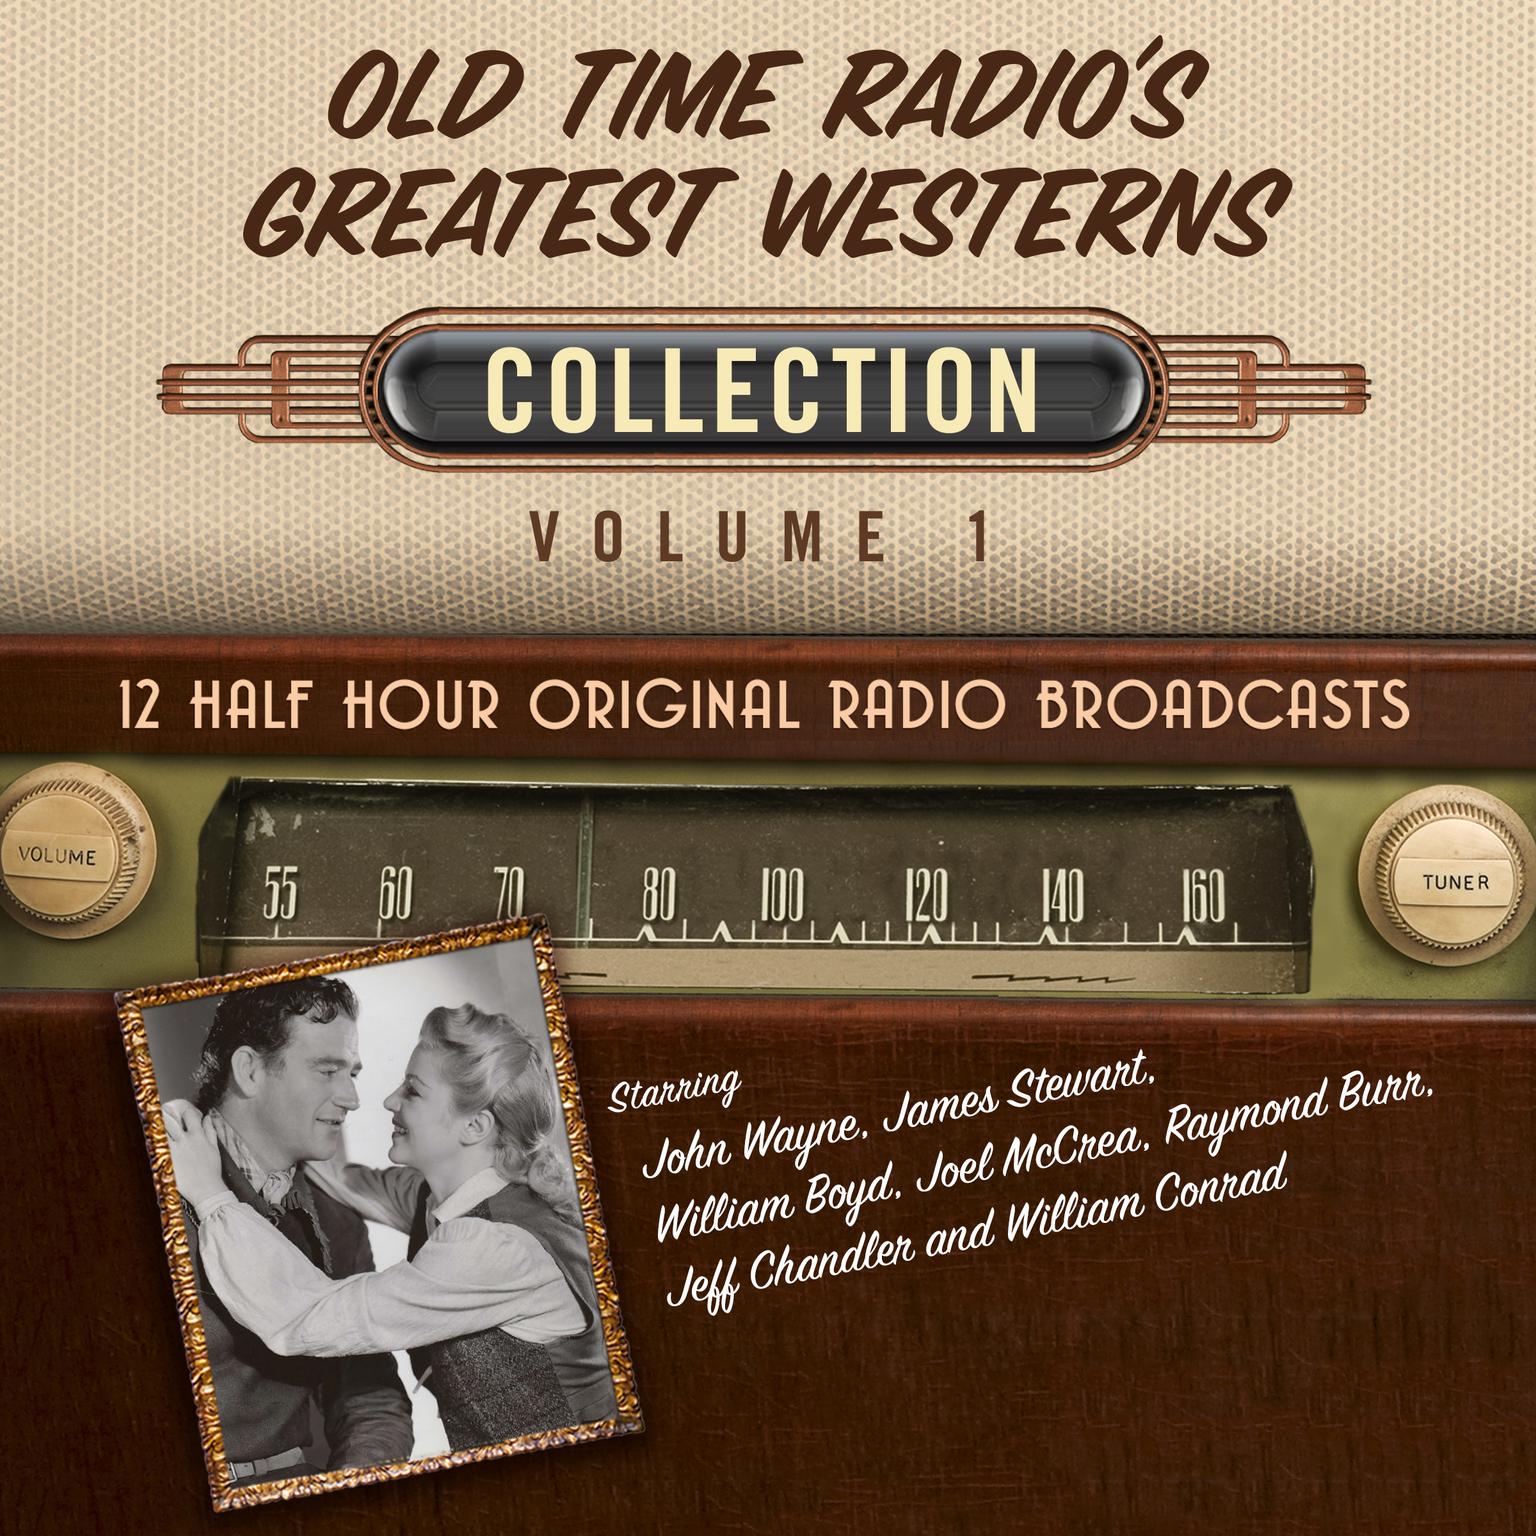 Old Time Radios Greatest Westerns, Collection 1 Audiobook, by Black Eye Entertainment